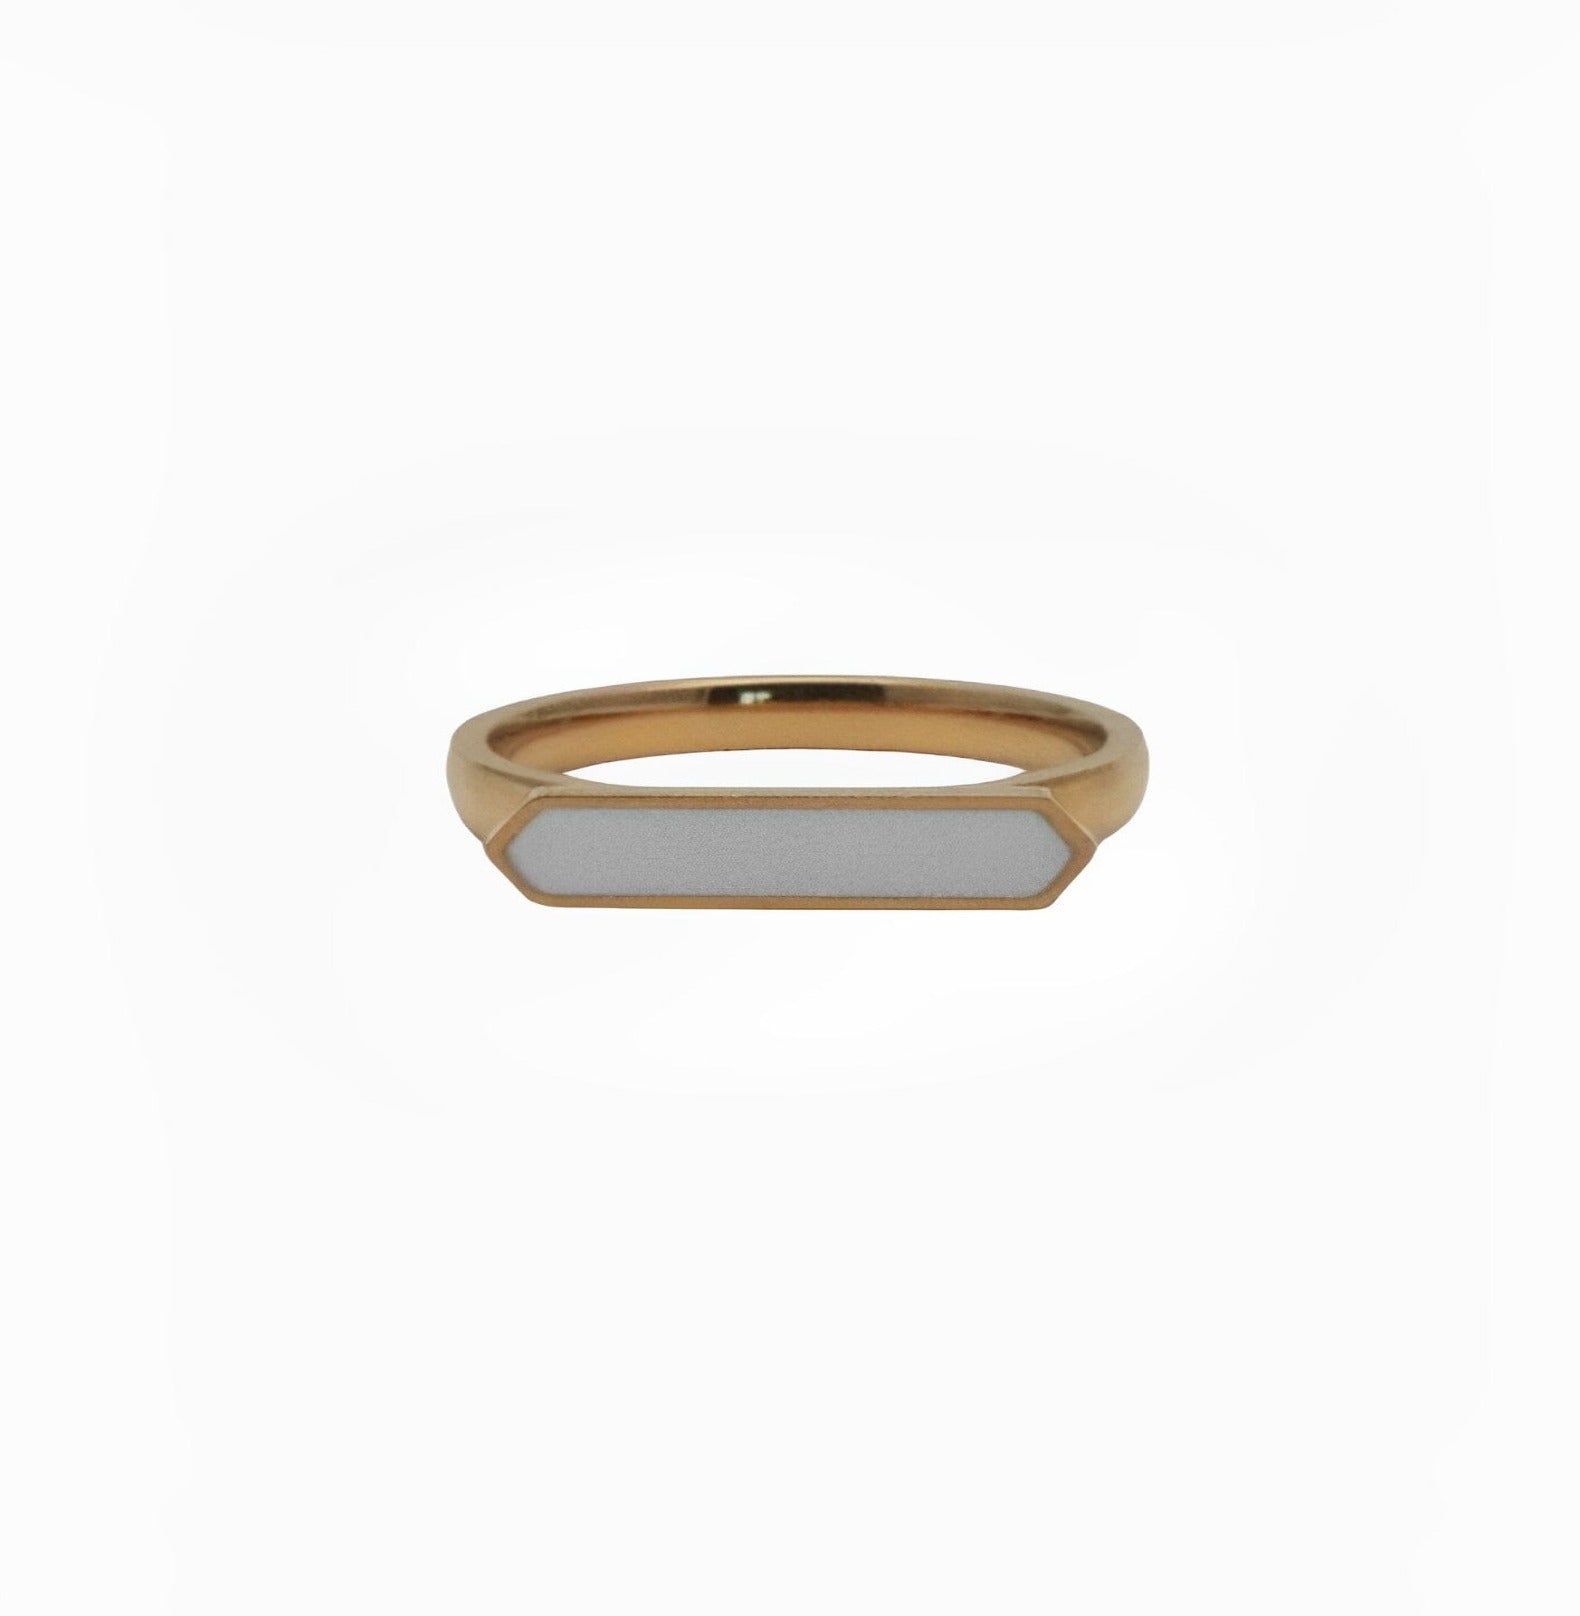 BLANCO BAR RING ring Yubama Jewelry Online Store - The Elegant Designs of Gold and Silver ! 